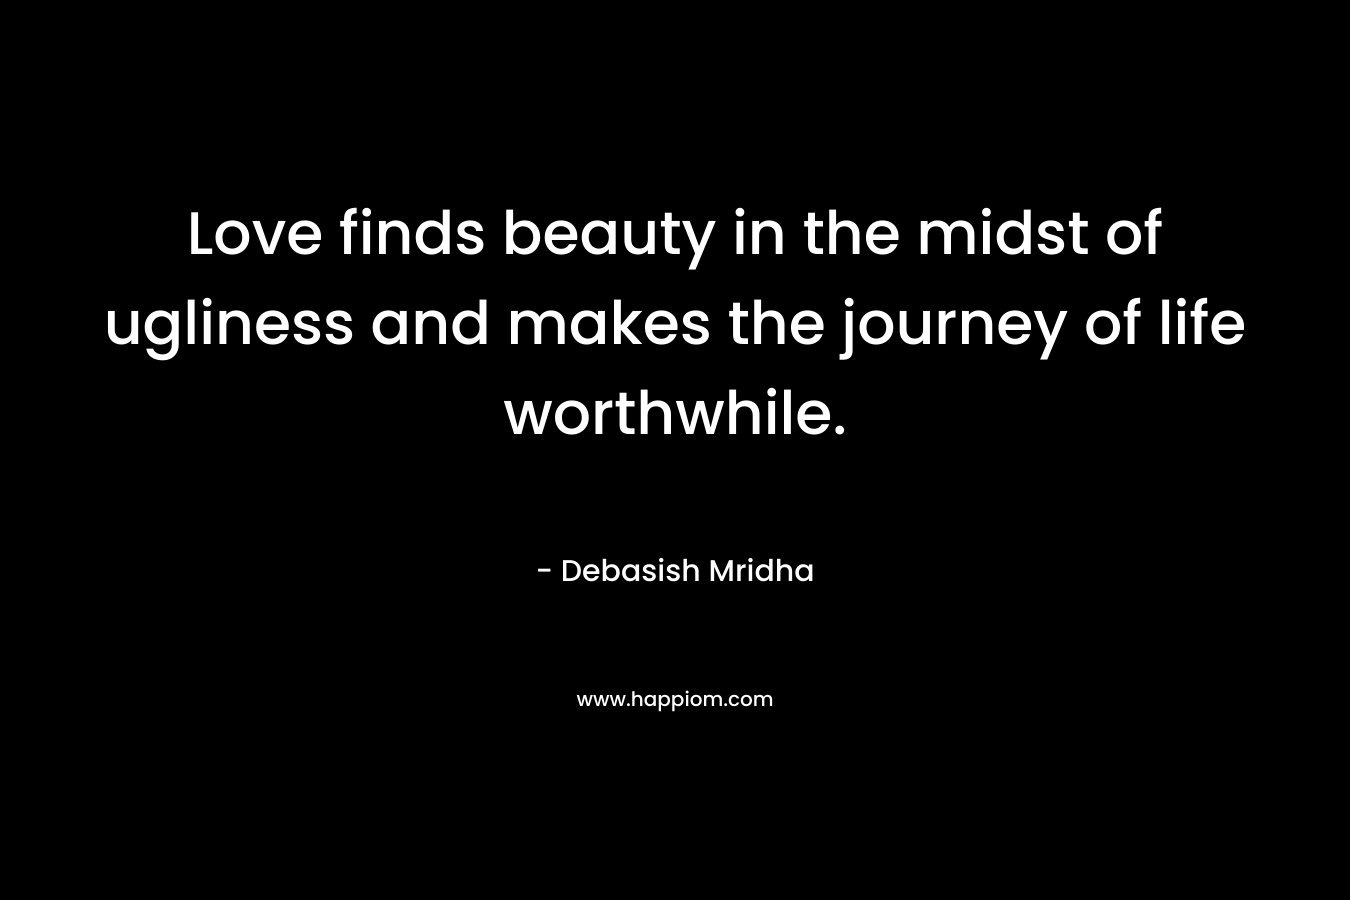 Love finds beauty in the midst of ugliness and makes the journey of life worthwhile.